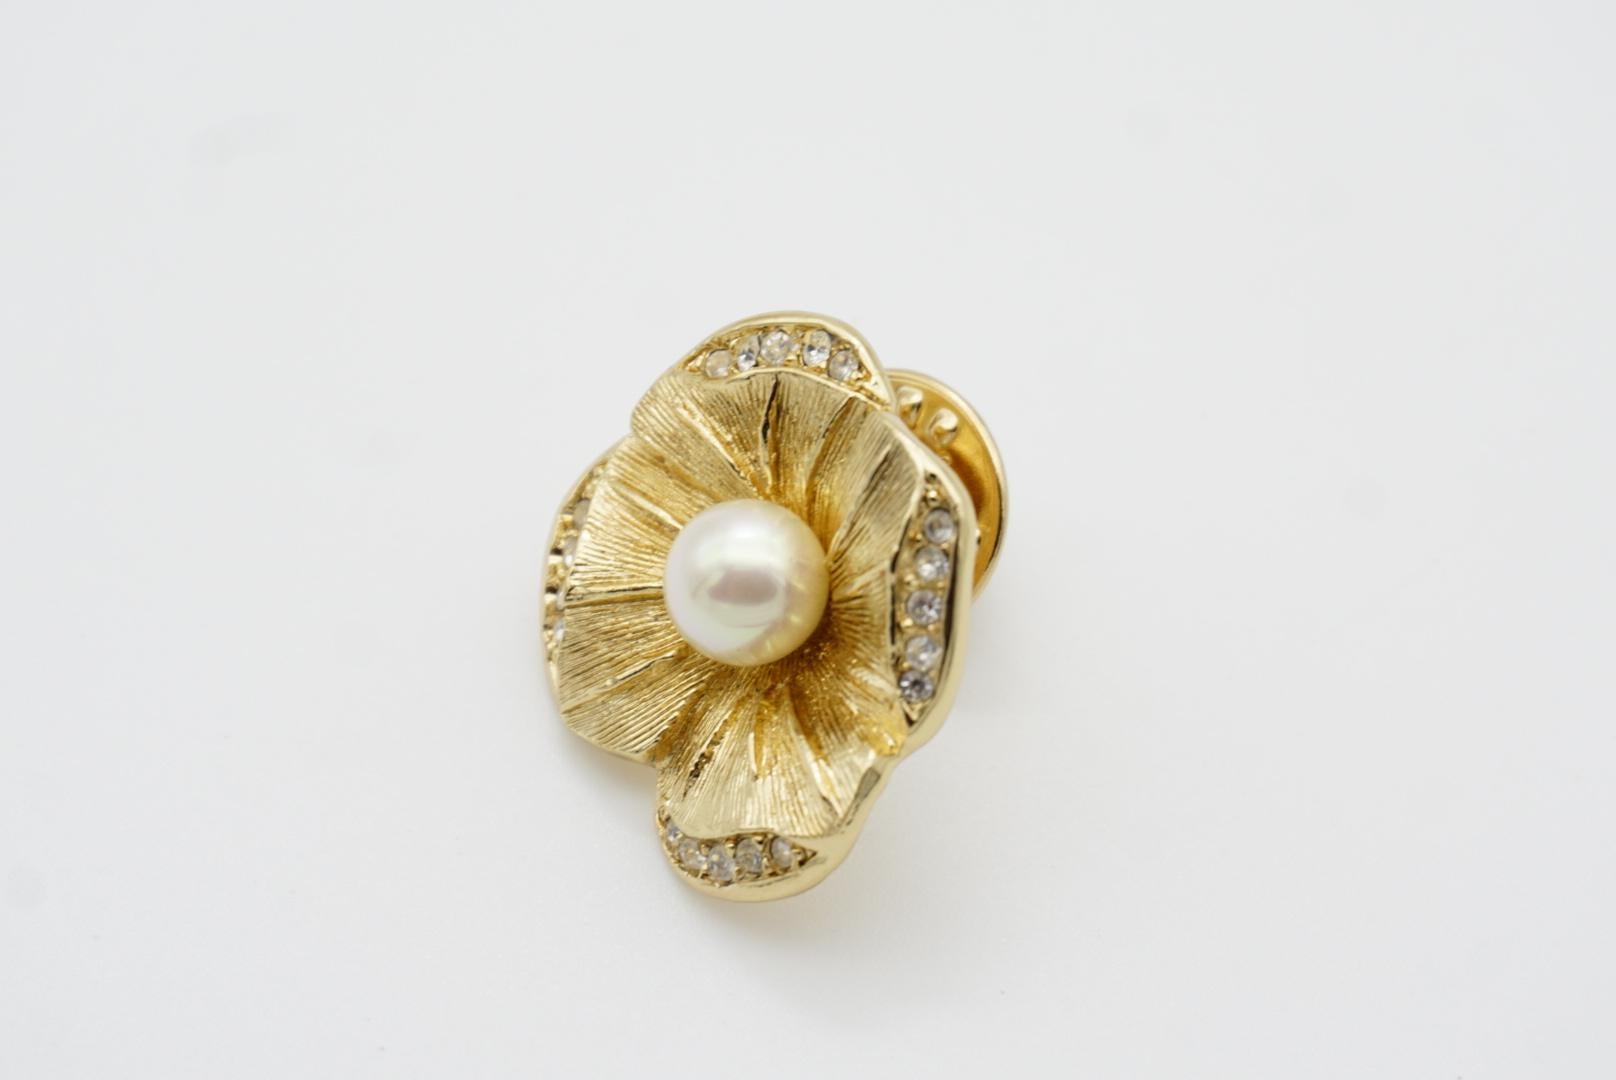 Christian Dior Vintage 1980s White Round Pearl Crystals Flower Gold Pin Brooch For Sale 5